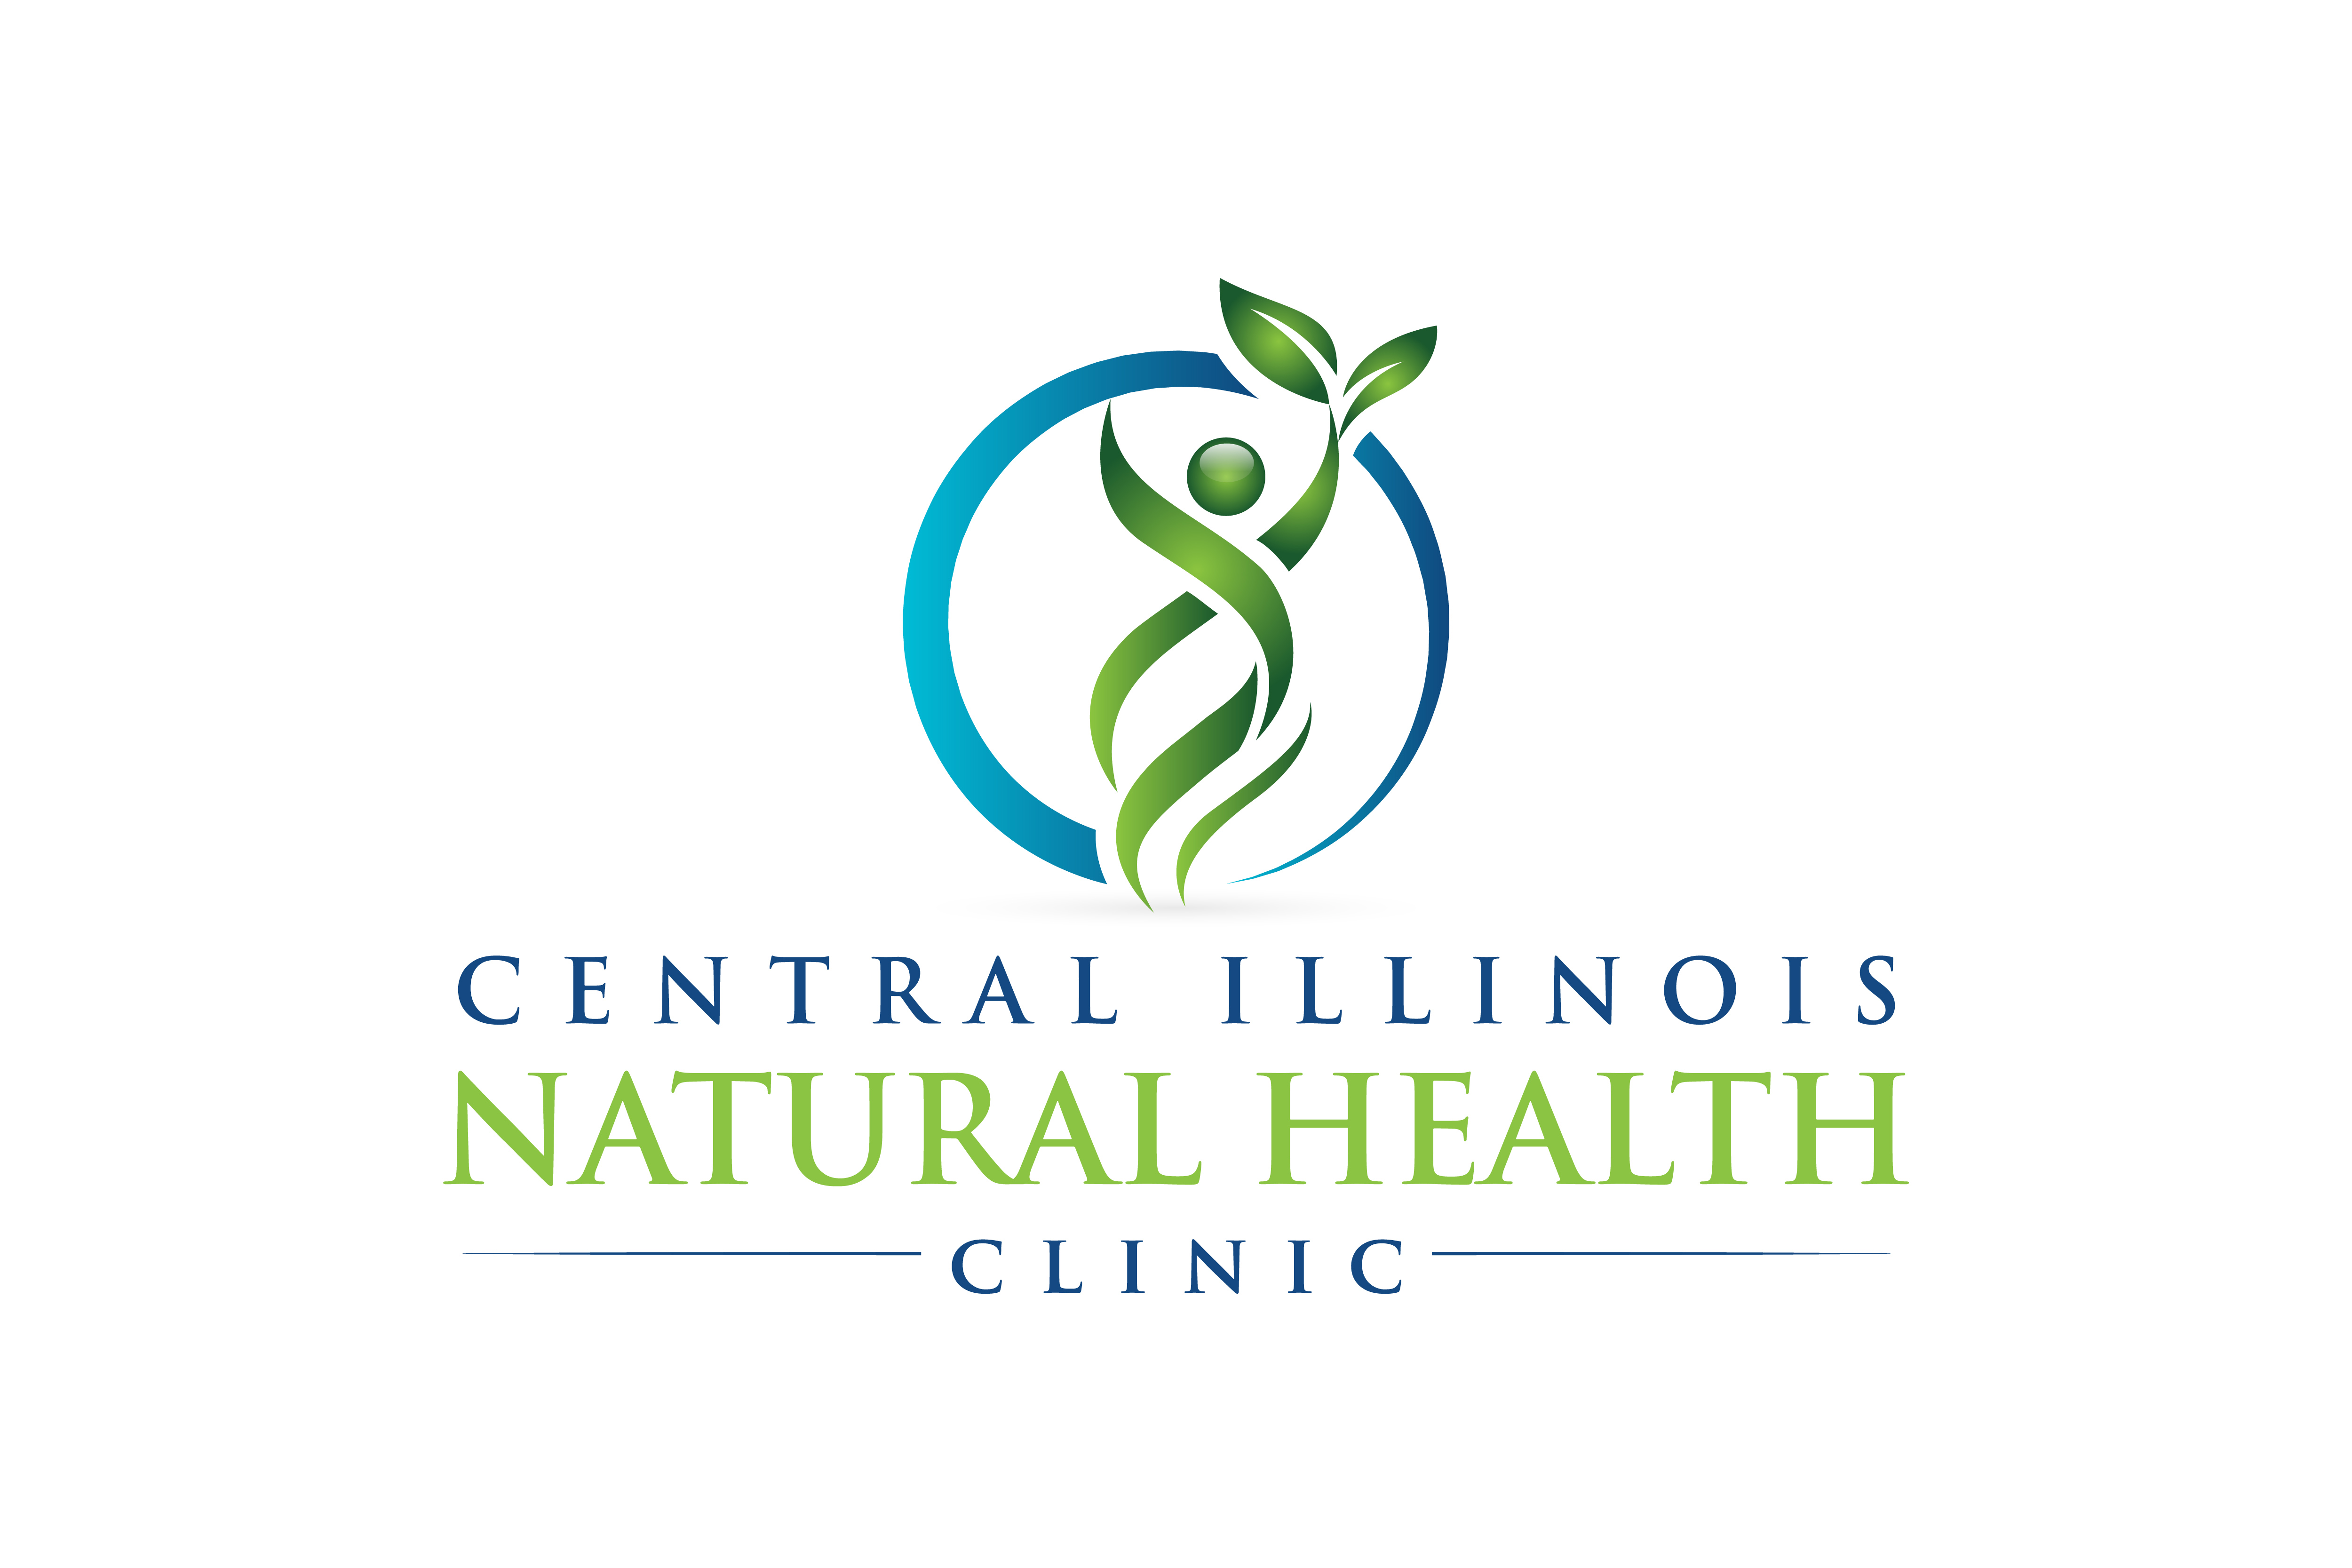 Central Illinois Natural Health Clinic